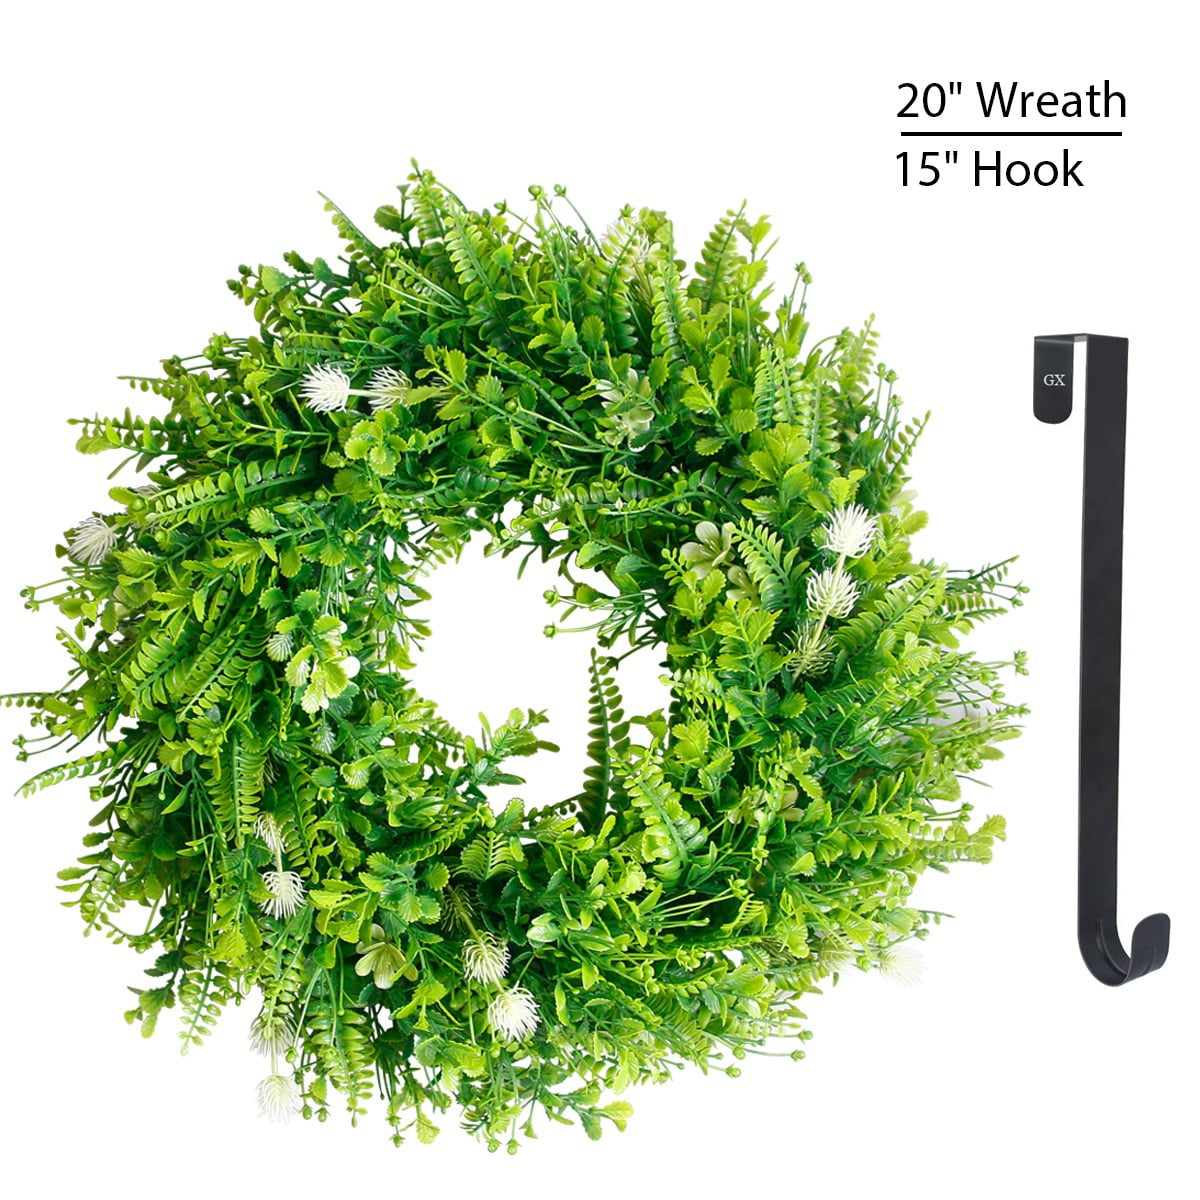 Tropica Blue Leaves Wreath Sign for Front Door Artificial Green Plants with Elegant Bow Hanging Round Well Pediments Halloween Thanksgiving Harvest Farmhouse Porch Wall Decorations